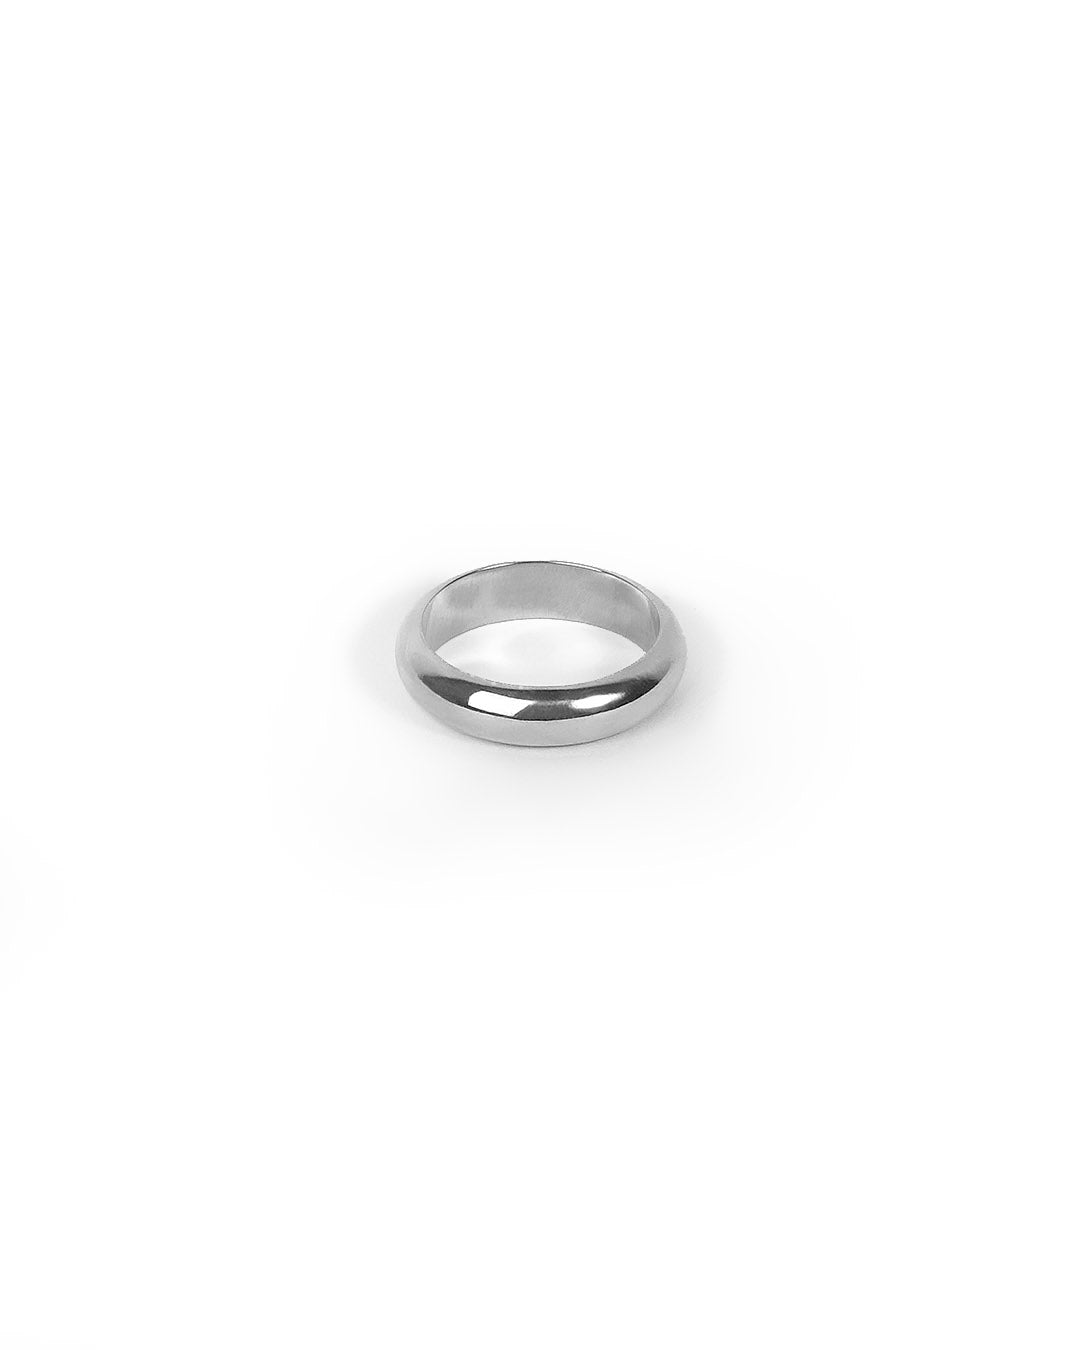 Handmade Simple Band Ring - Bold Form Ring - NEEO